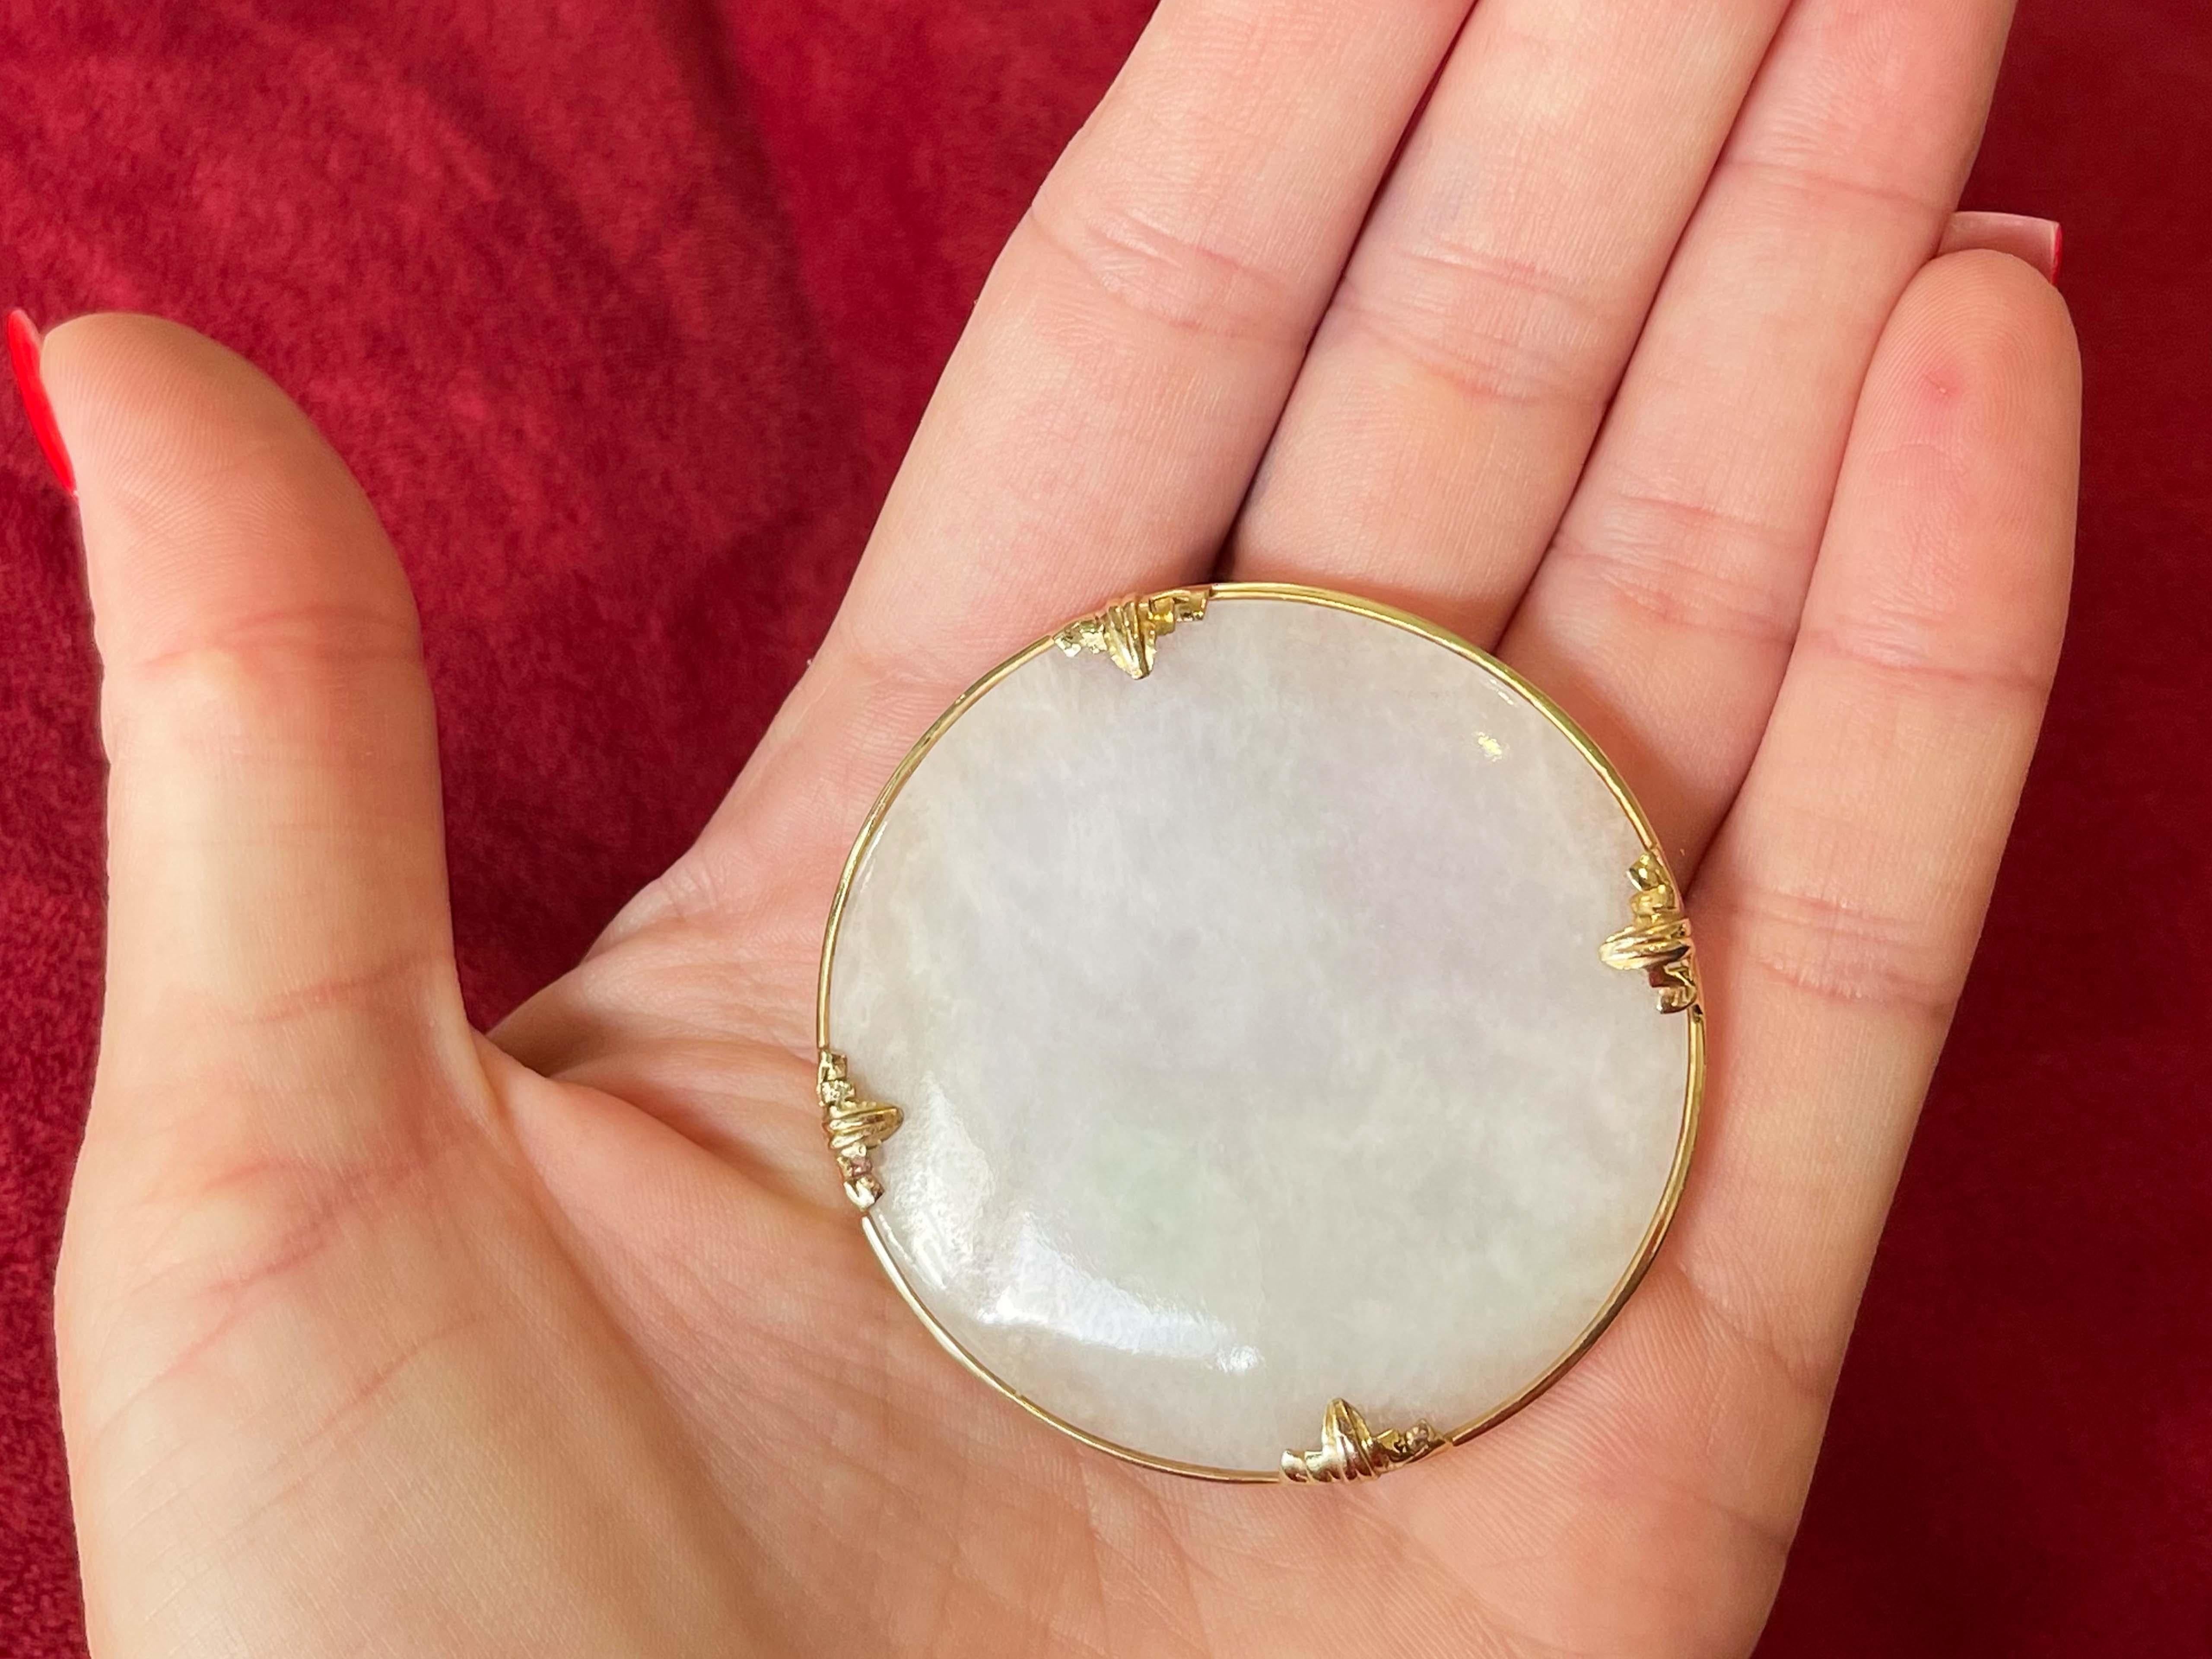 Brooch Specifications:

Designer: Ming's Hawaii

Metal: 14k Yellow Gold

Total Weight: 27.4 Grams

Stone: Natural White Jade 

Brooch Measurements: ~2